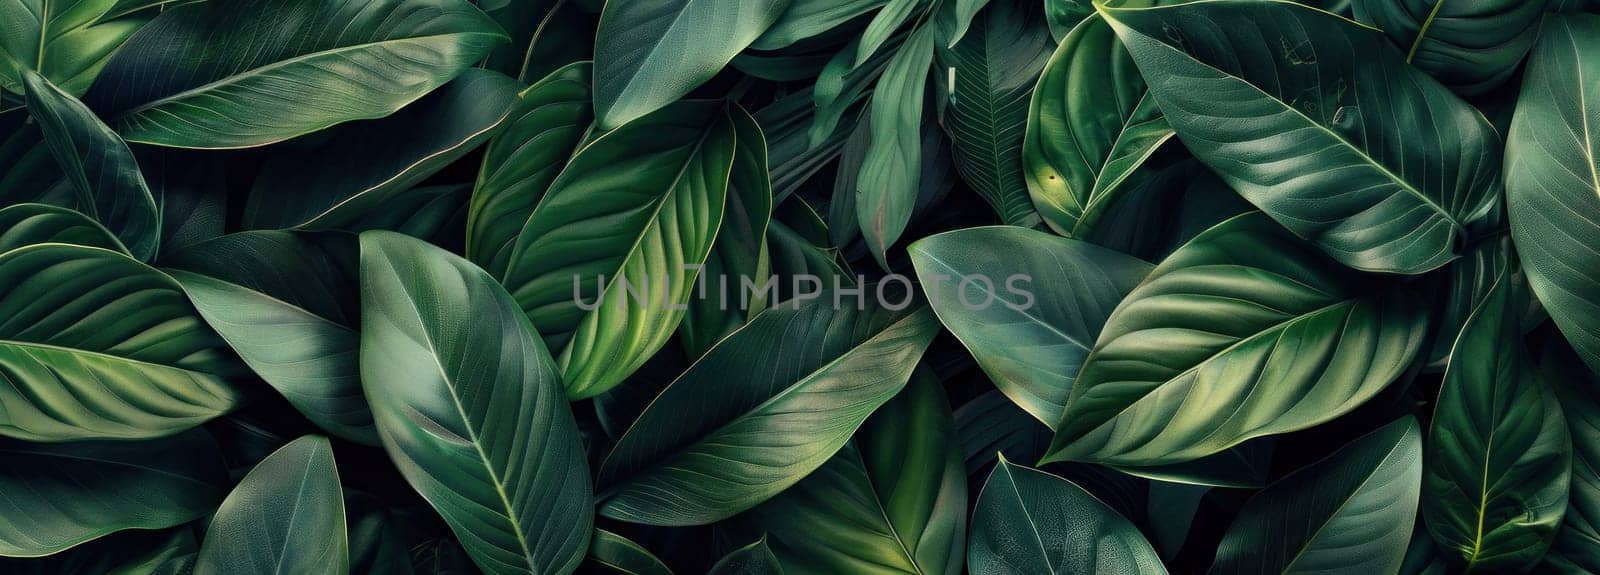 Green leaves closeup on dark background nature texture background beauty artistic concept outdoor garden environment pattern detail foliage botanical flora ecofriendly design conceptual image by Vichizh